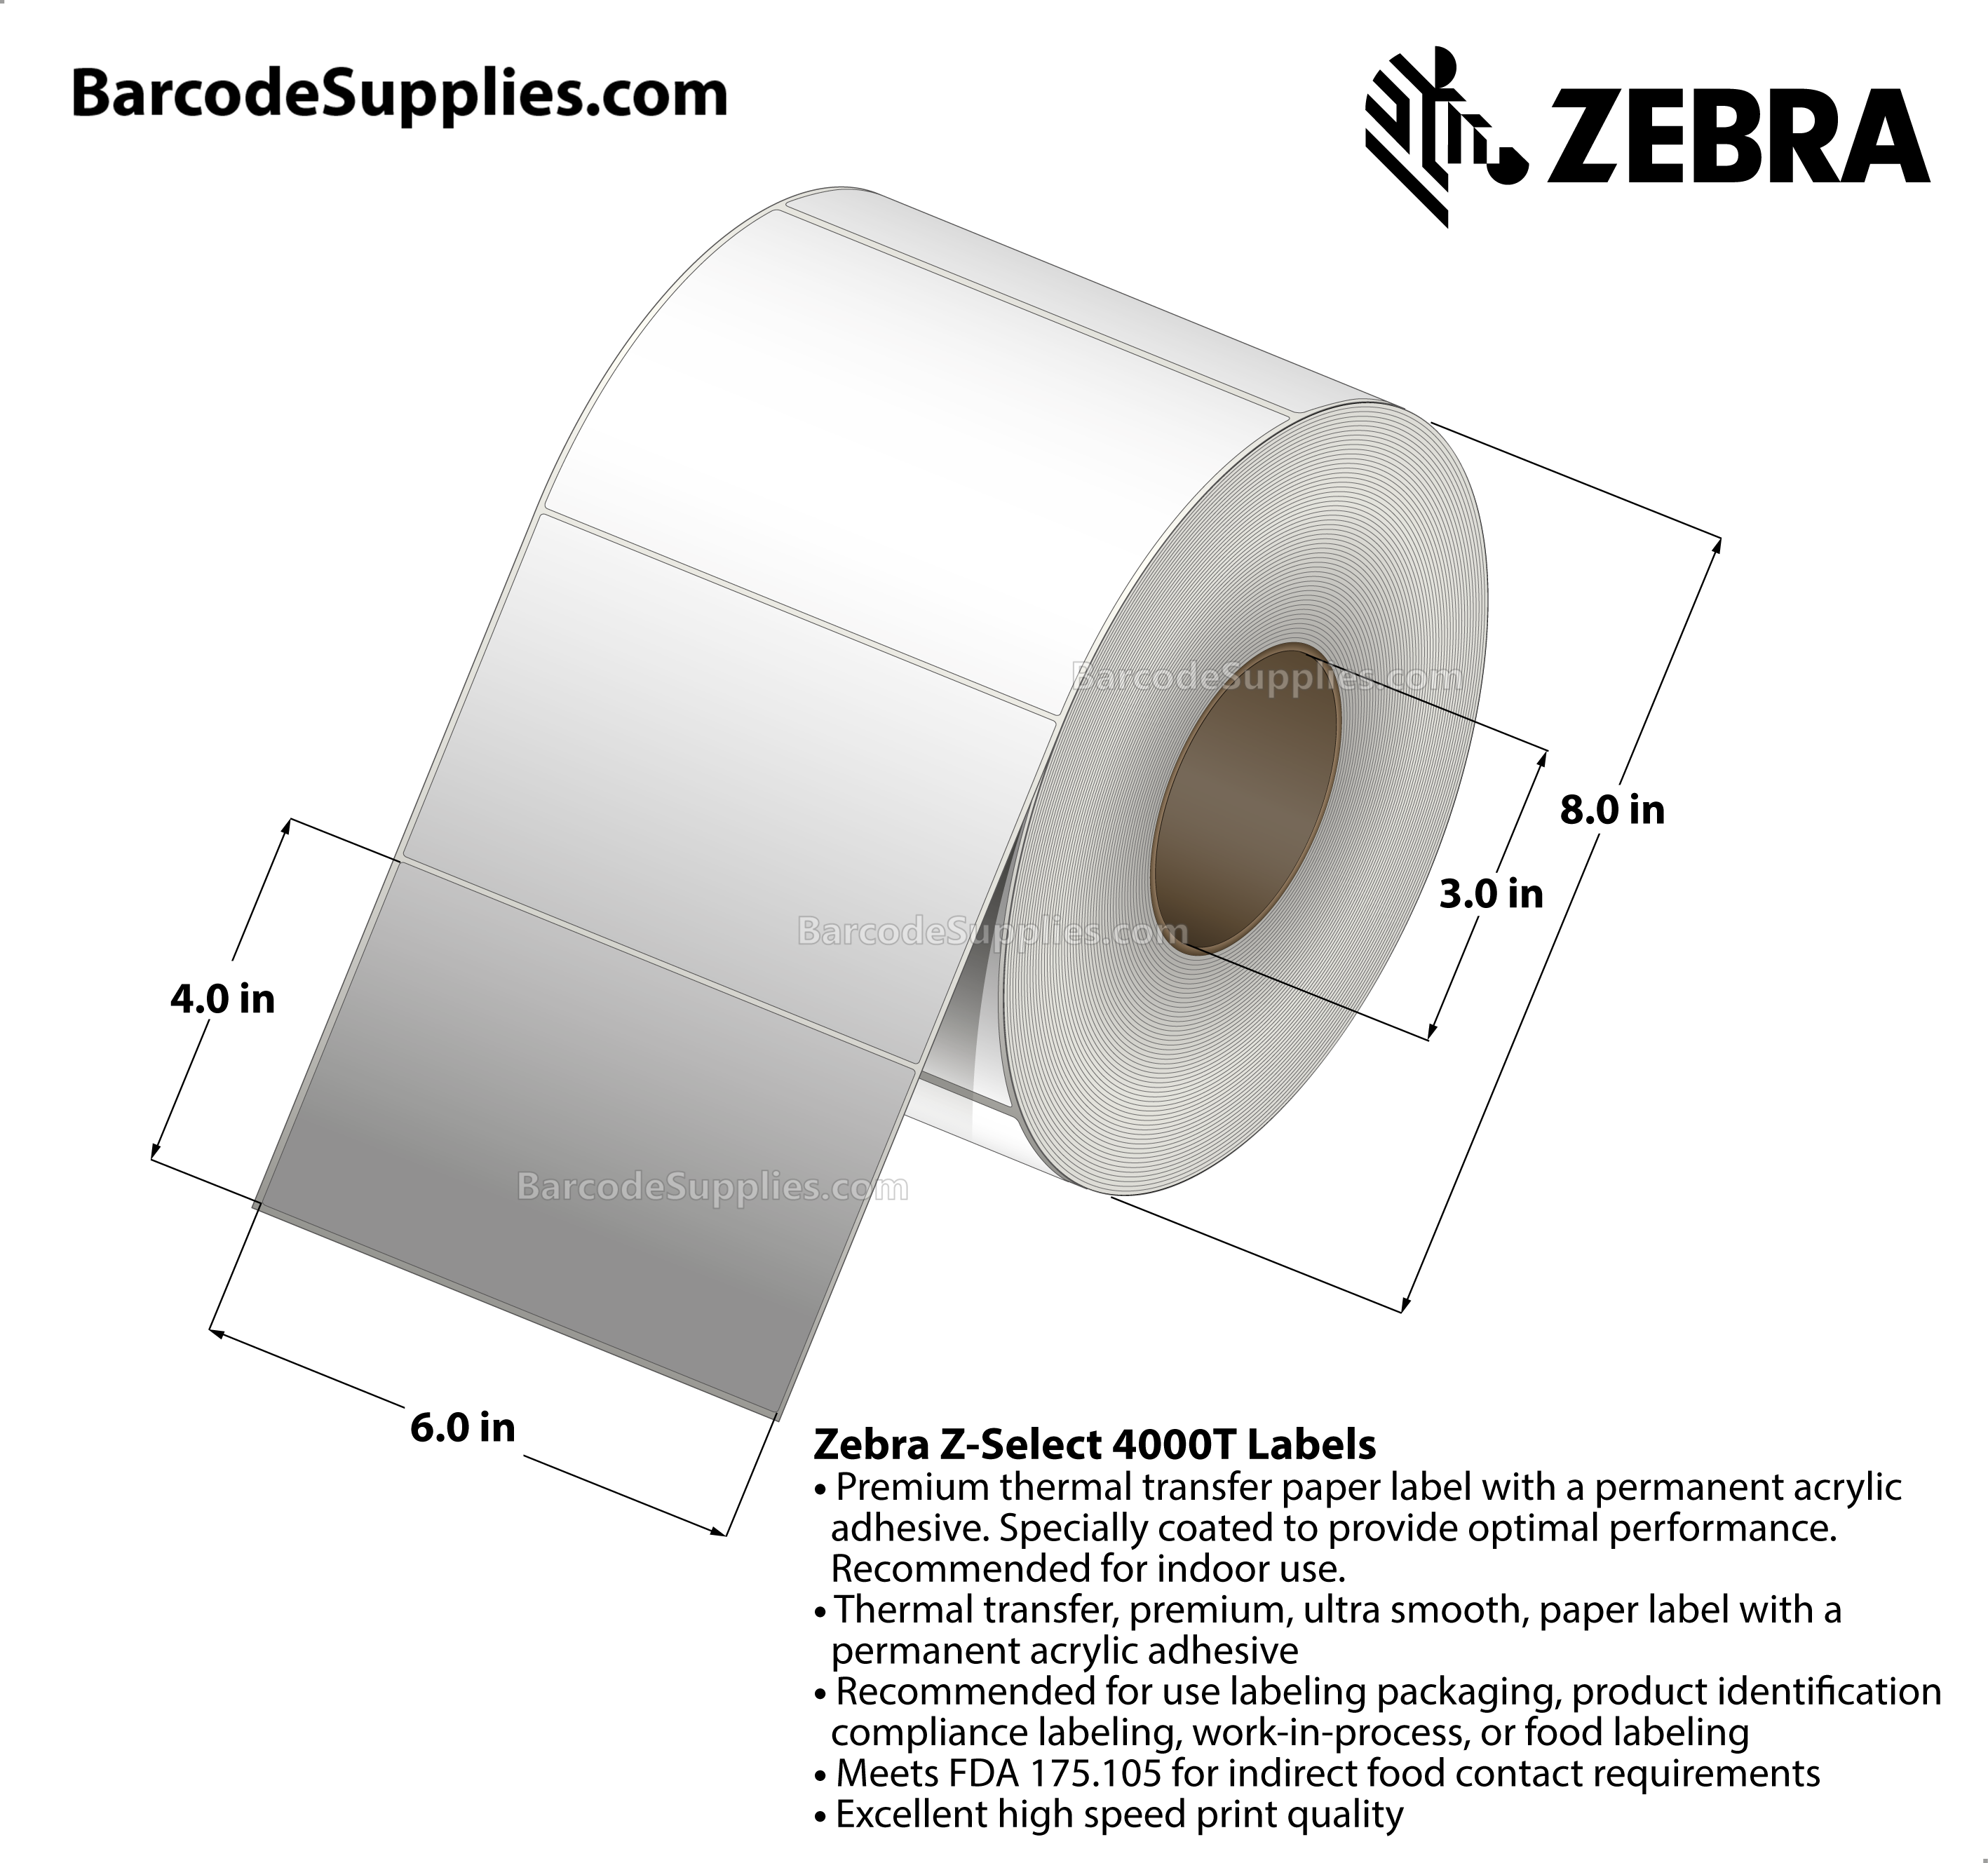 6 x 4 Thermal Transfer White Z-Select 4000T Labels With Permanent Adhesive - Not Perforated - 1410 Labels Per Roll - Carton Of 2 Rolls - 2820 Labels Total - MPN: 72354